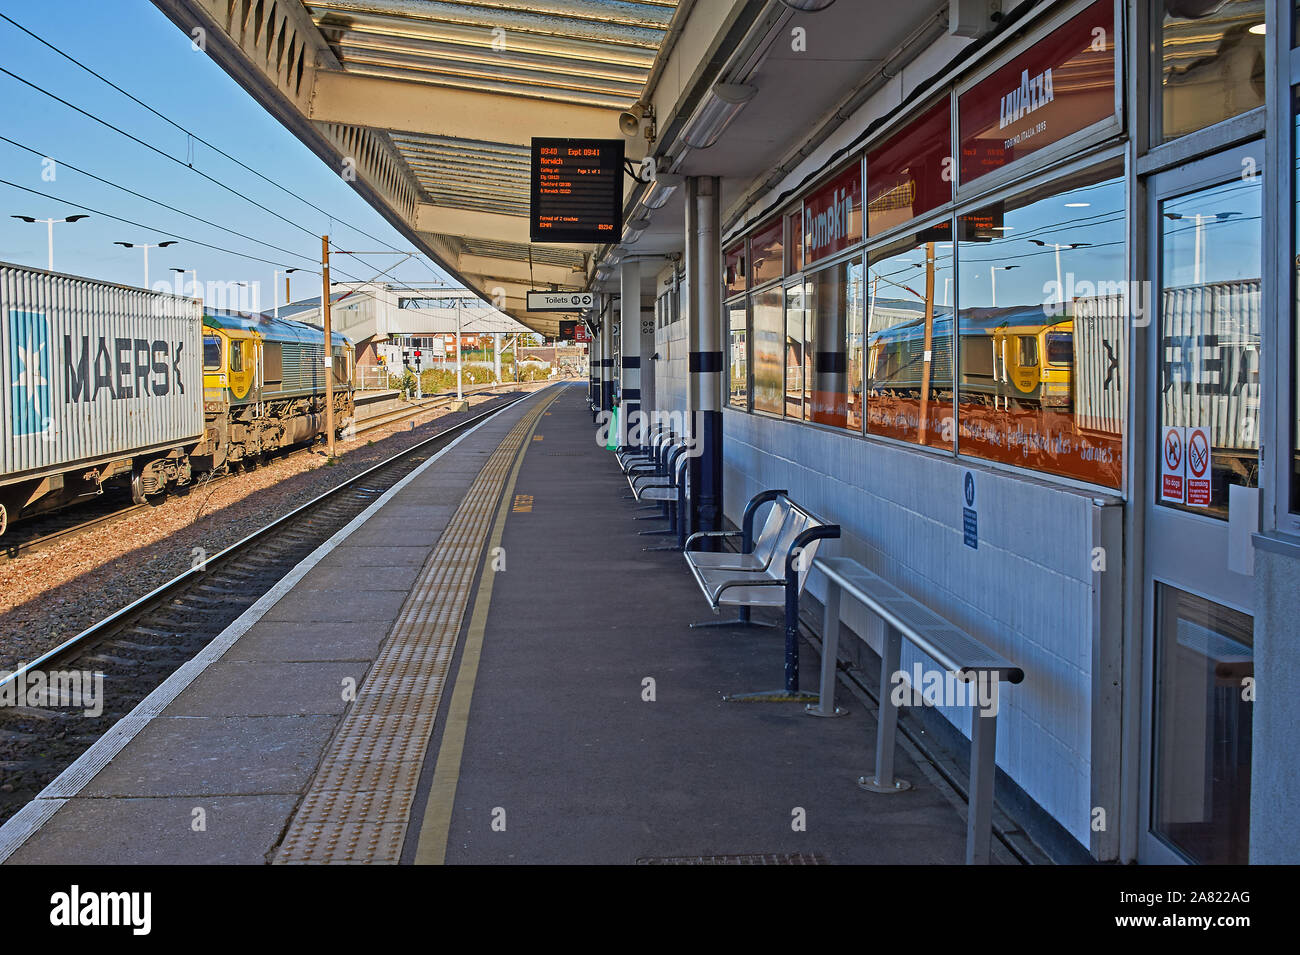 An inter-modal freightliner train pulled by a Class  66 locomotive waits at a red signal in Peterborough station. Stock Photo